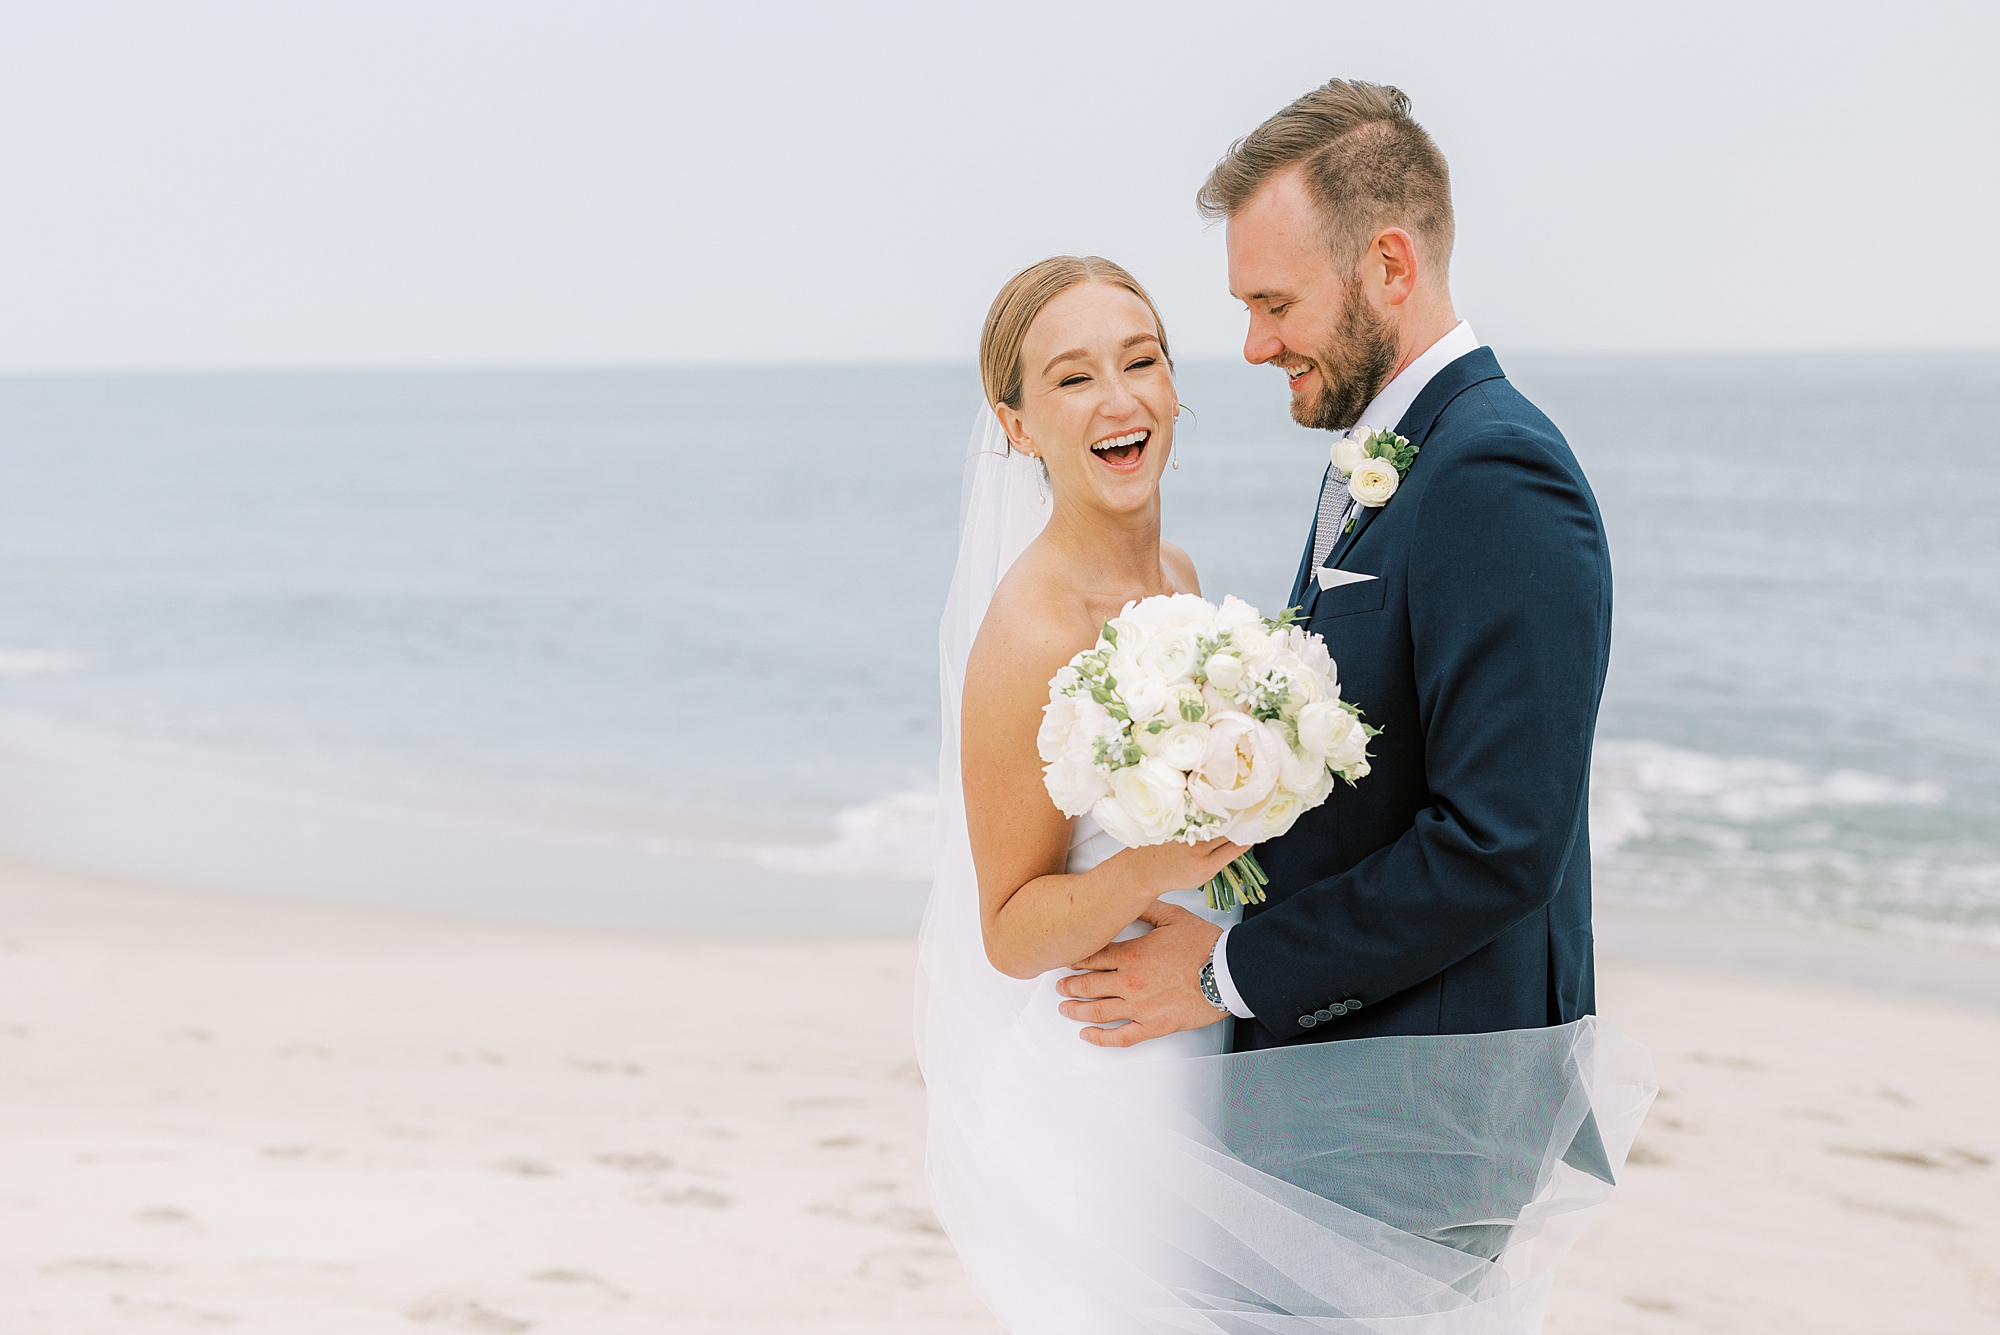 groom looks down at bride making her laugh with veil around them on Cape May beach